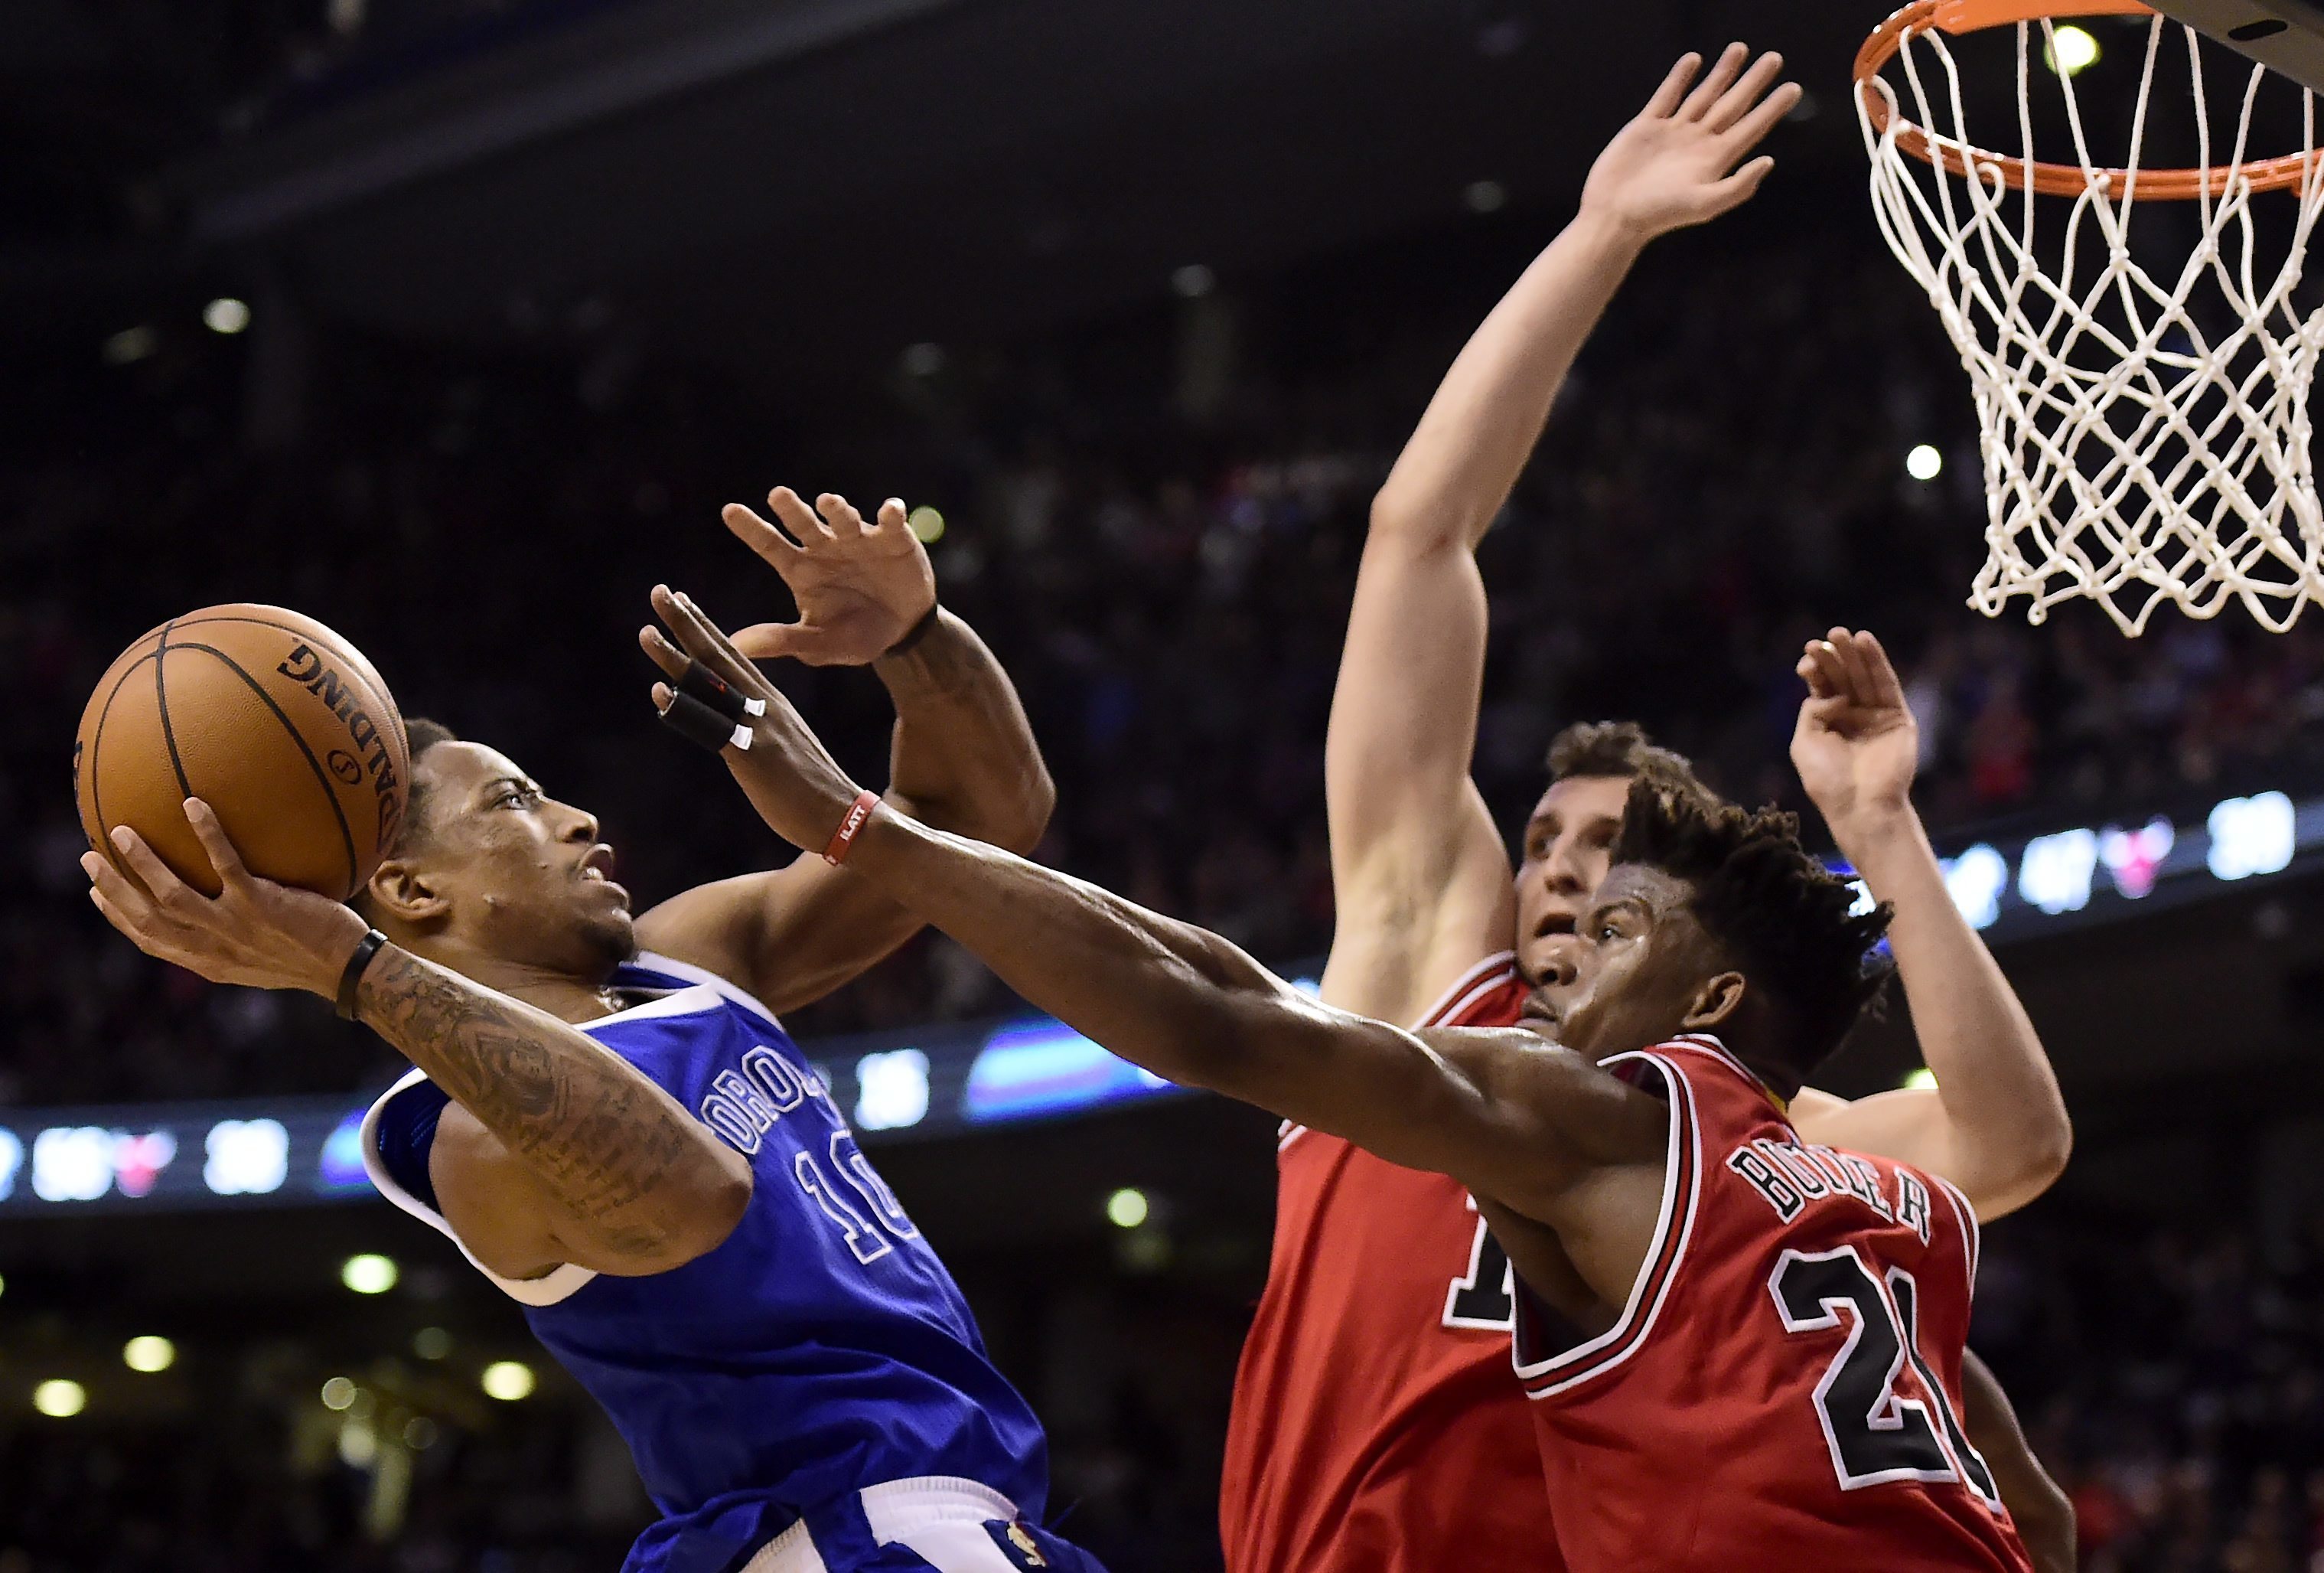 Toronto Raptors guard DeMar DeRozan (10) drives to the net to set up teammate Patrick Patterson (54) as Chicago Bulls forward Jimmy Butler (21) and forward Paul Zipser (16) defend during overtime of an NBA basketball game in Toronto, Tuesday, March 21, 2017. (Frank Gunn/The Canadian Press via AP)